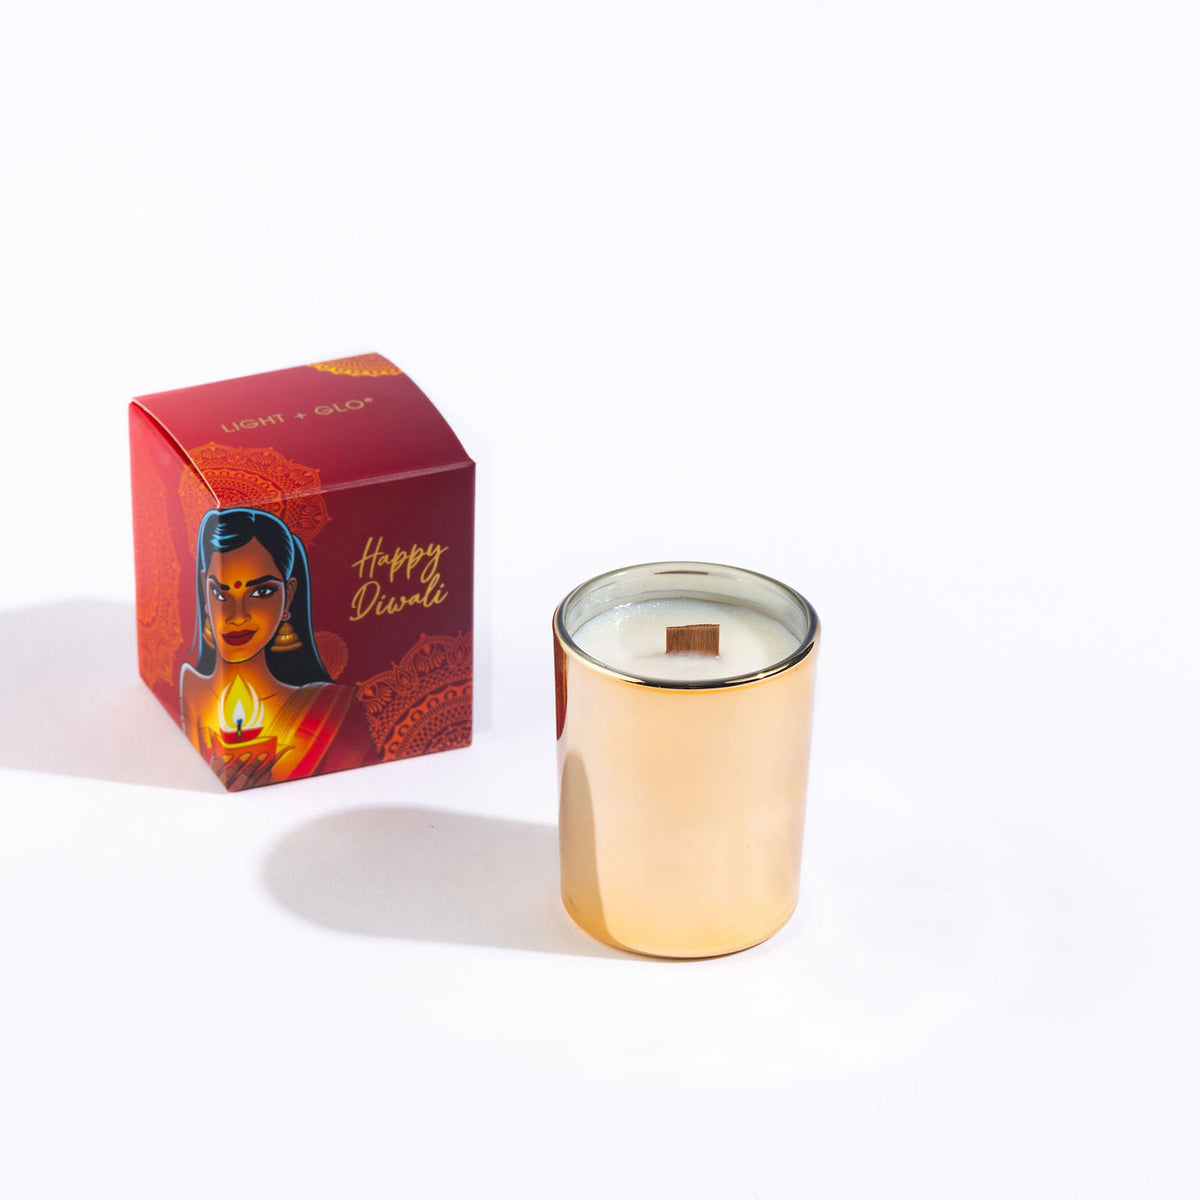 New Small Diwali Candle | Luxury Candles &amp; Home Fragrances by Light + Glo